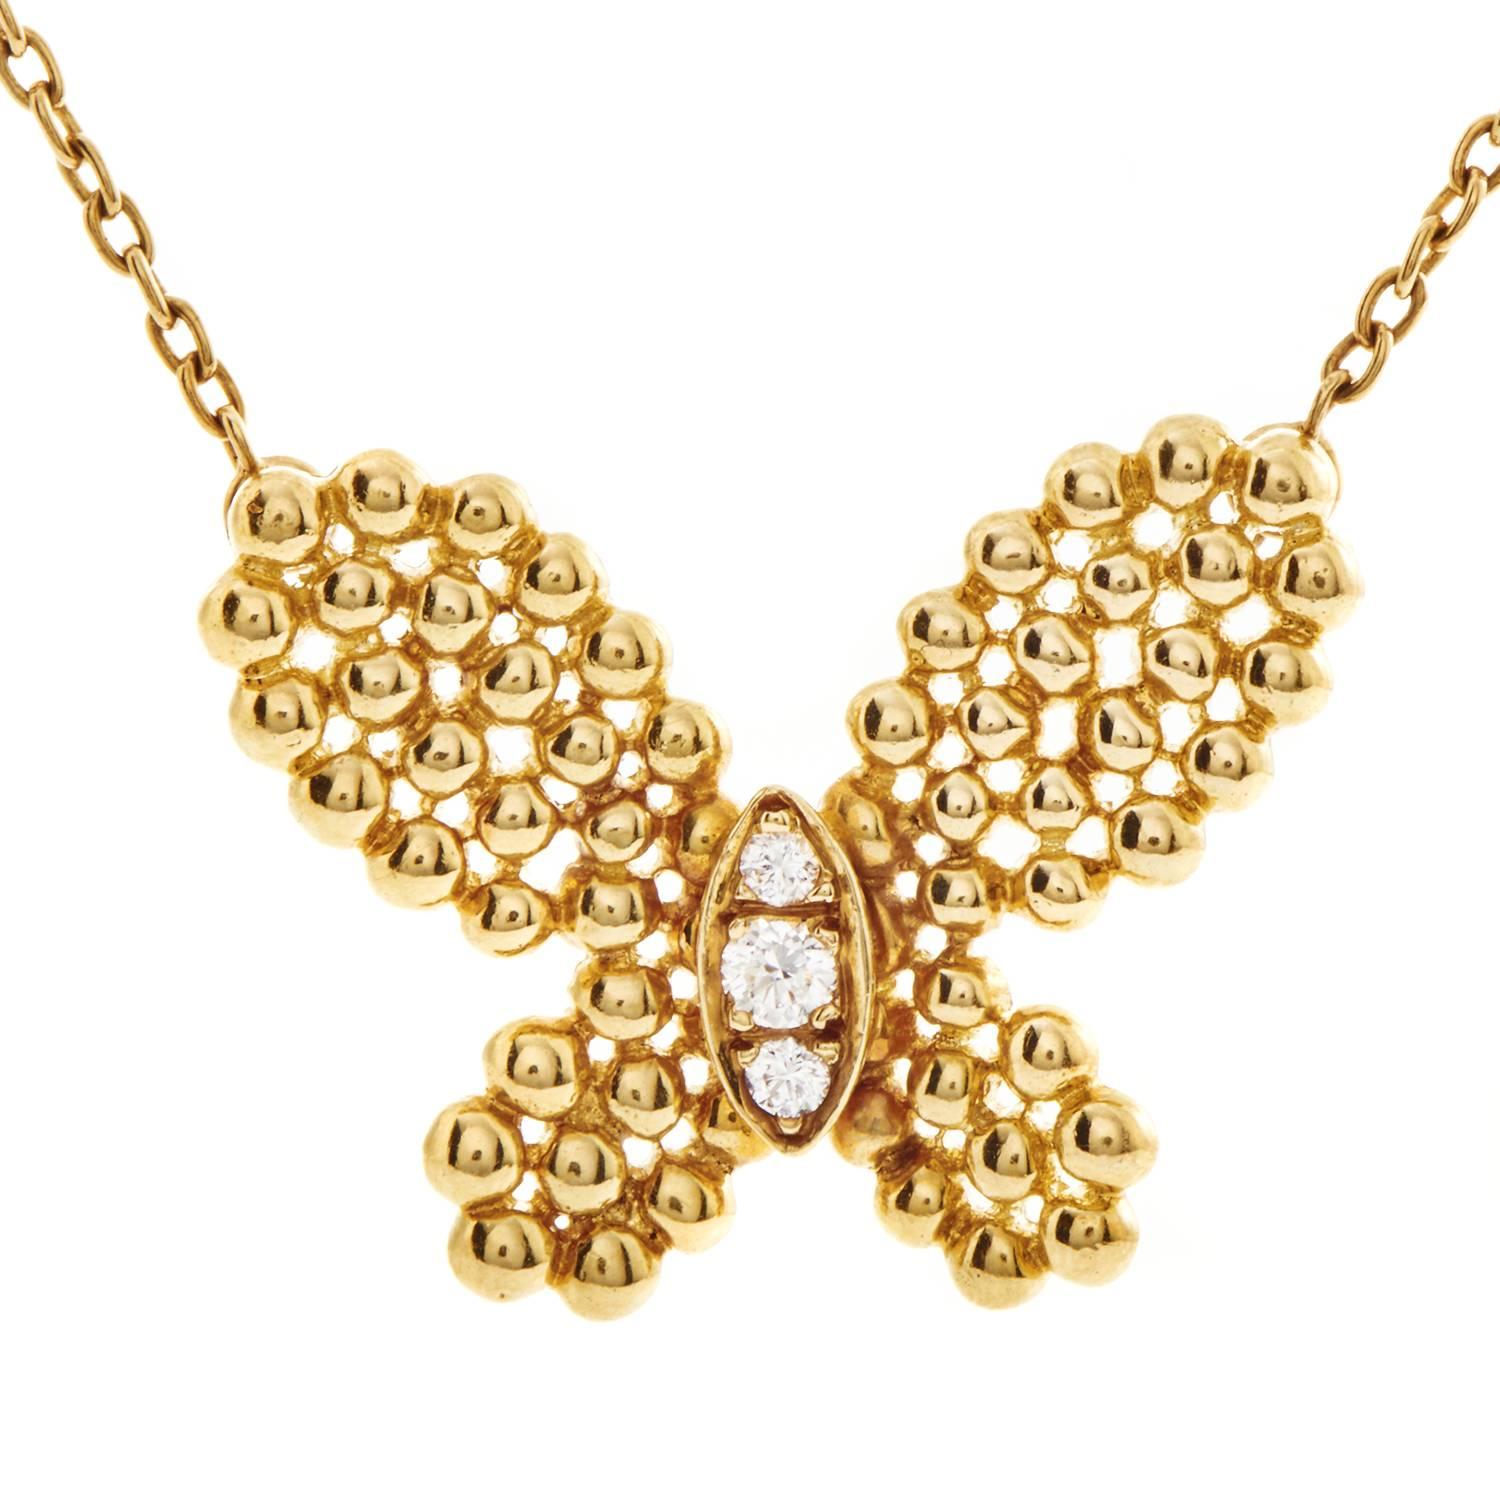 A compelling interpretation of the delightful butterfly motif, the pendant of this spellbinding necklace from Van Cleef & Arpels is comprised of shimmering beads of 18K yellow gold while set with glistening diamonds totaling 0.12ct for a delicate